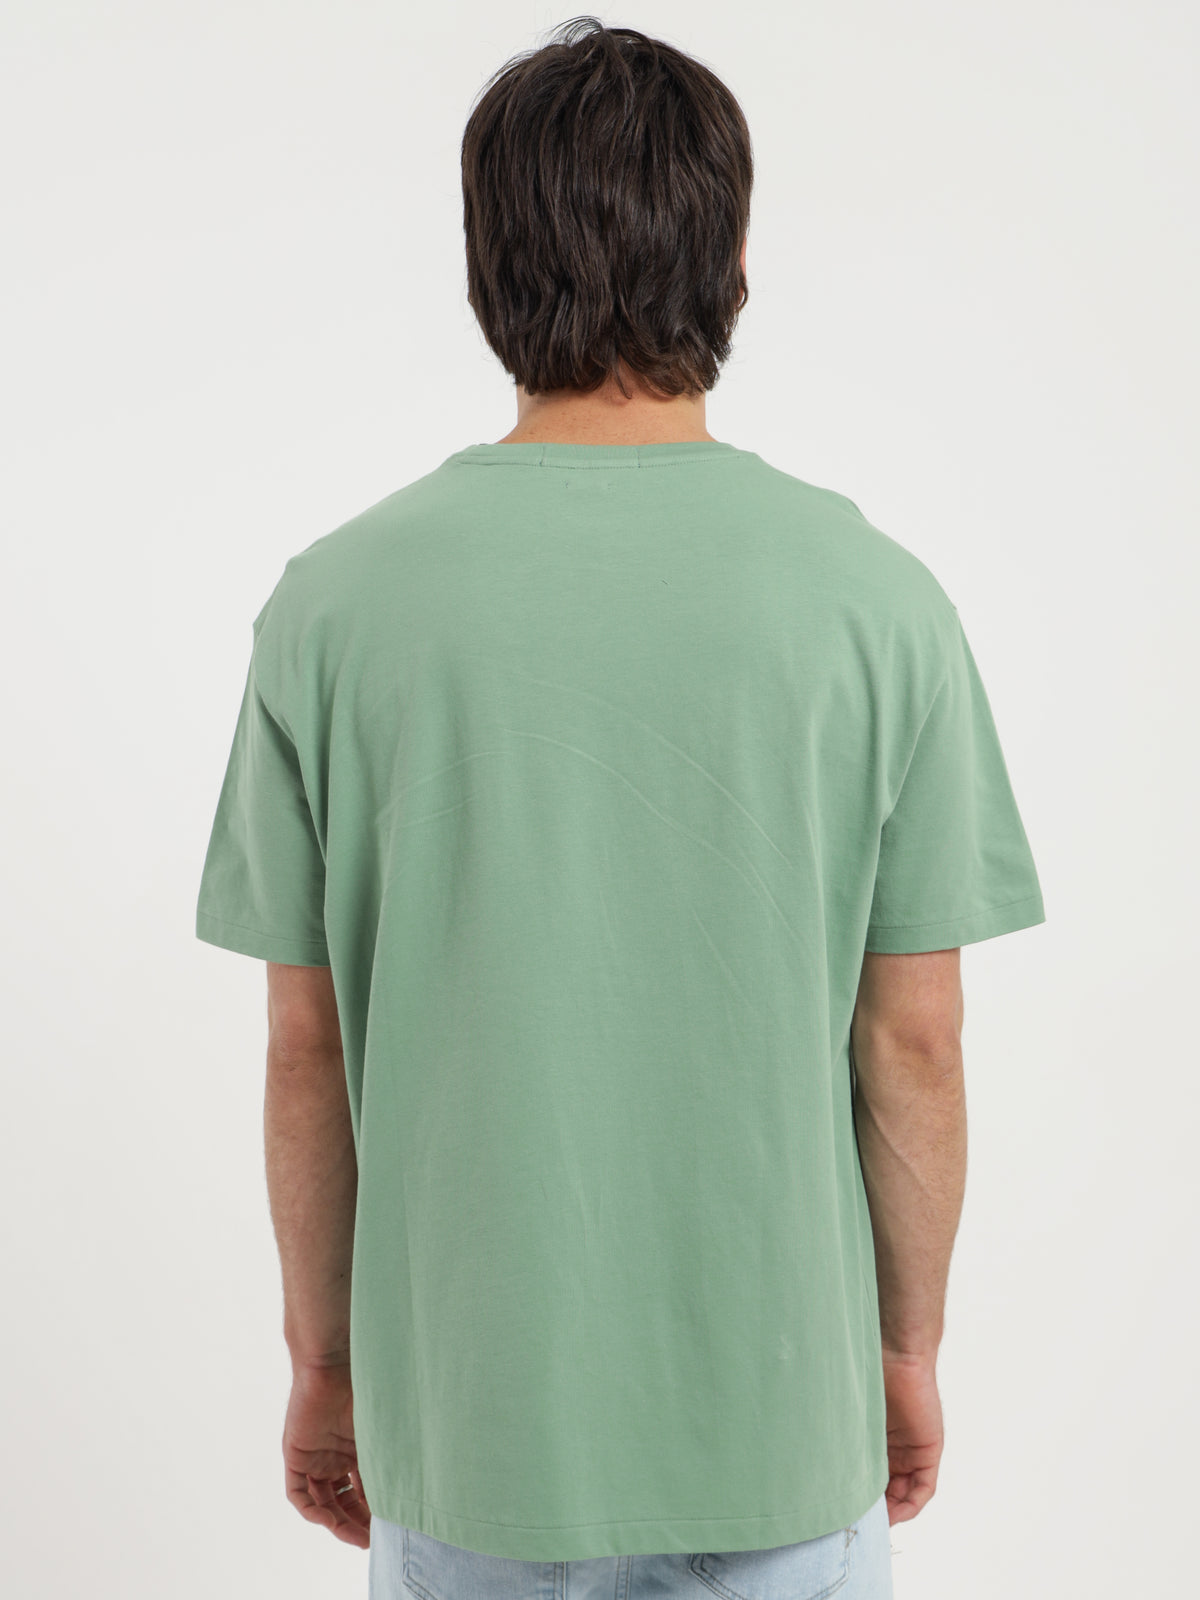 Sport Logo T-Shirt in Outback Green